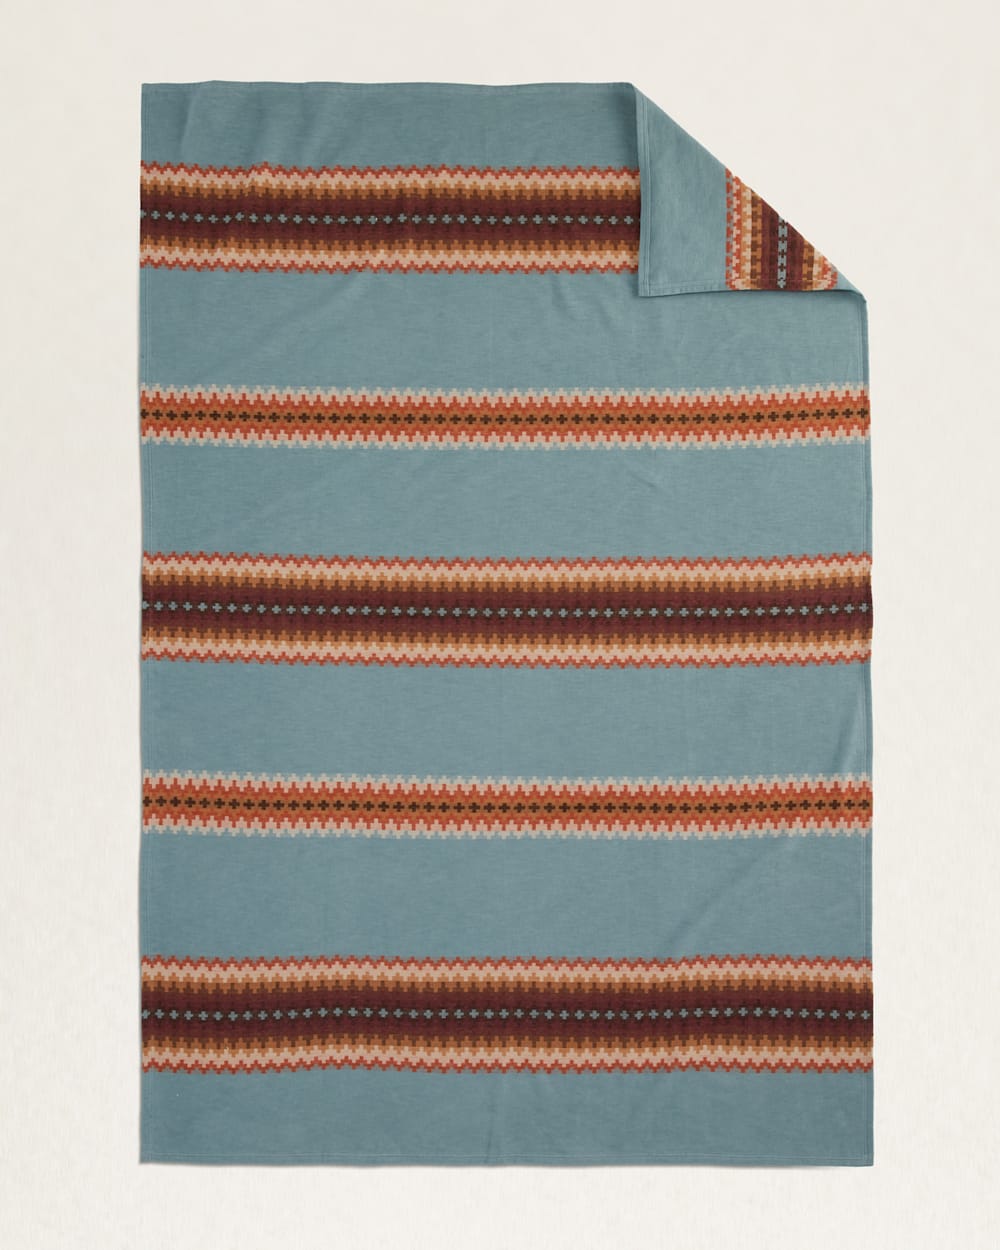 ALTERNATE VIEW OF LUNA MESA ORGANIC COTTON BLANKET IN SHALE image number 1